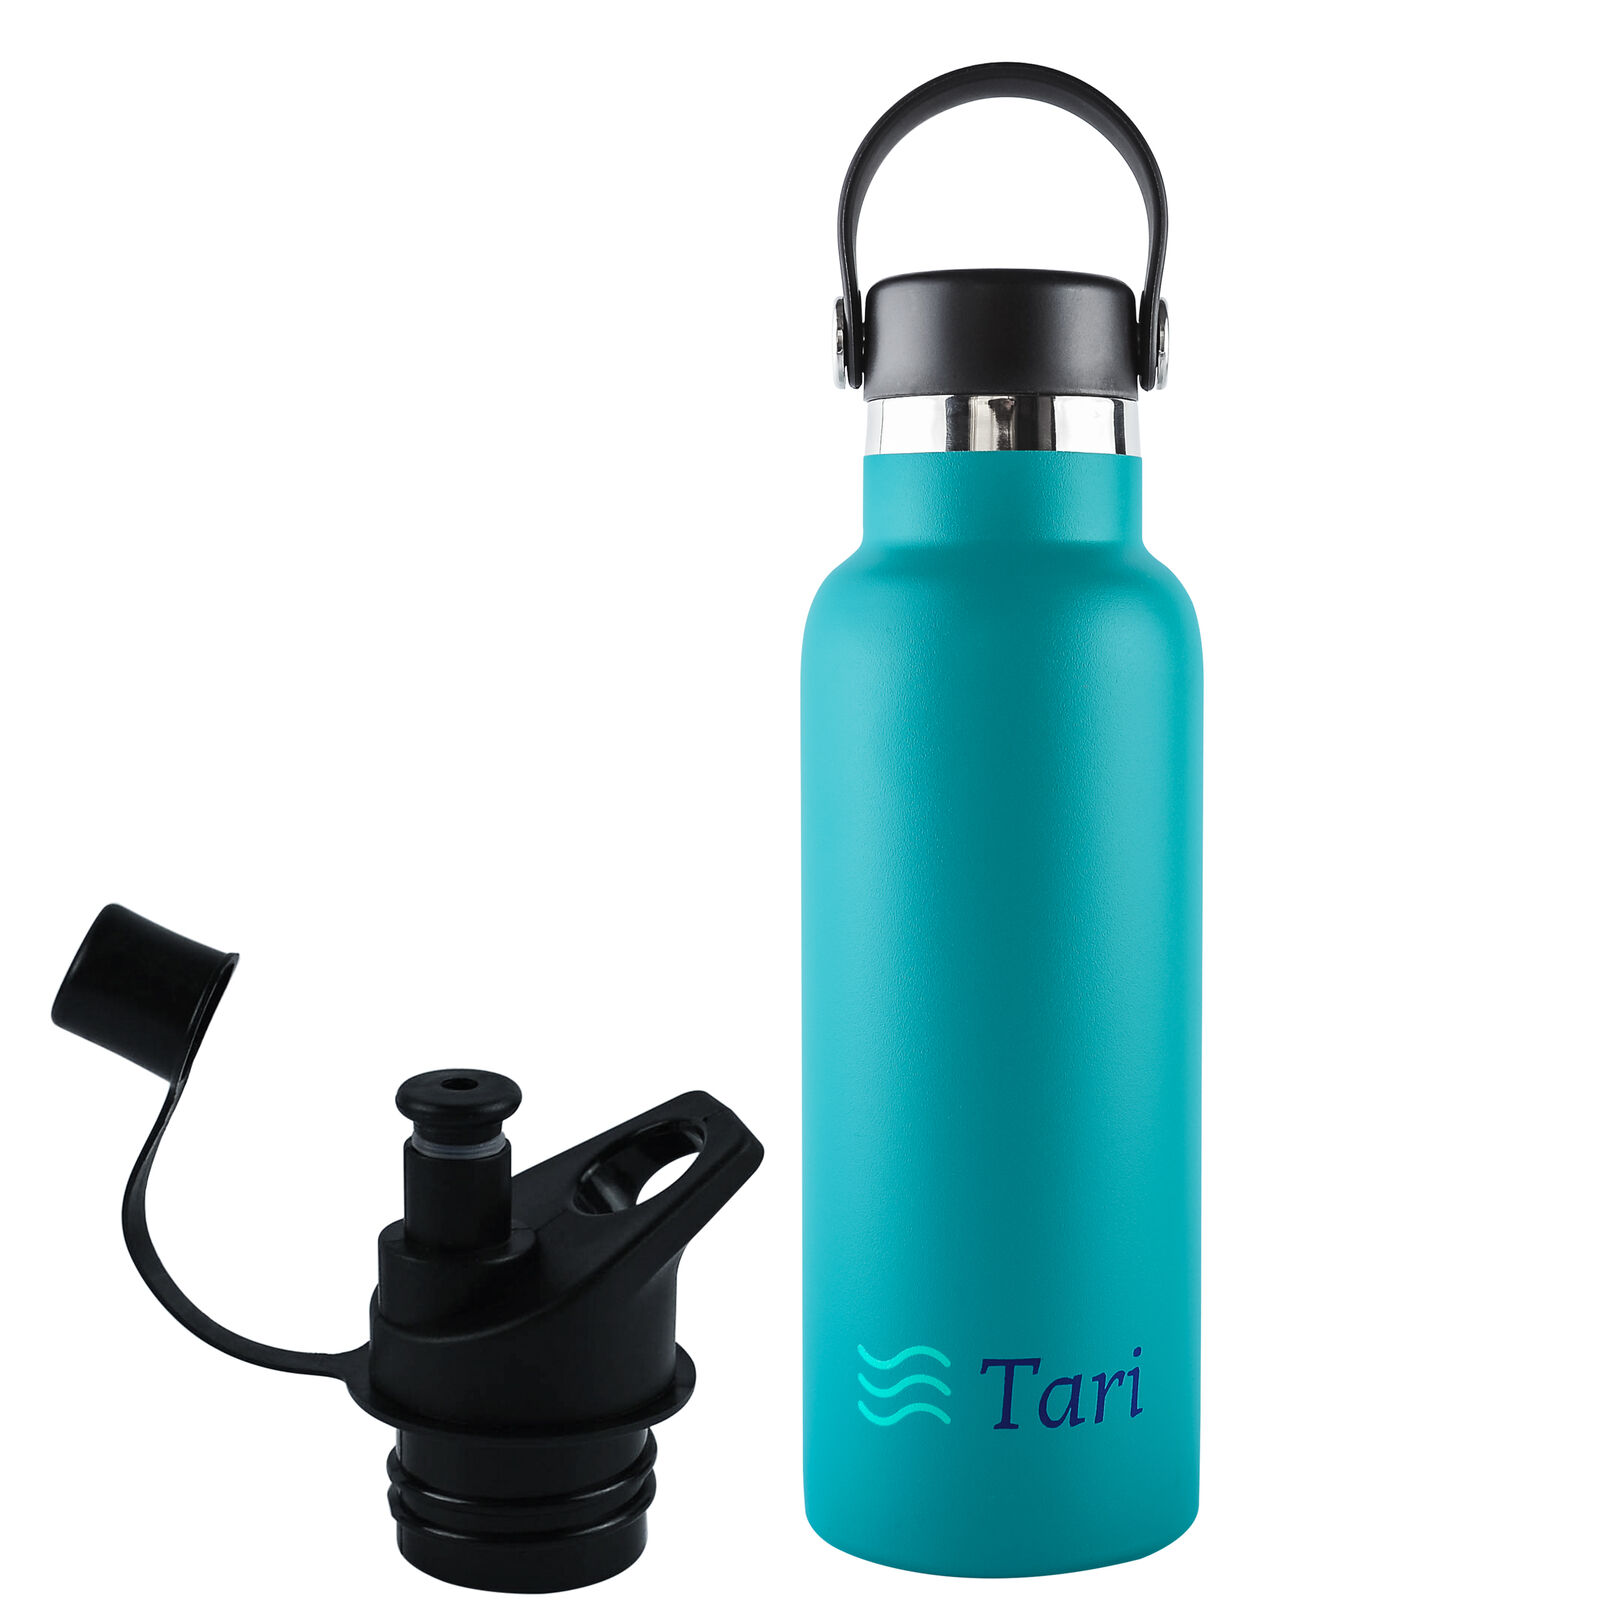 Insulated Wide-Mouth Stainless Steel Bottle 18.5 Oz